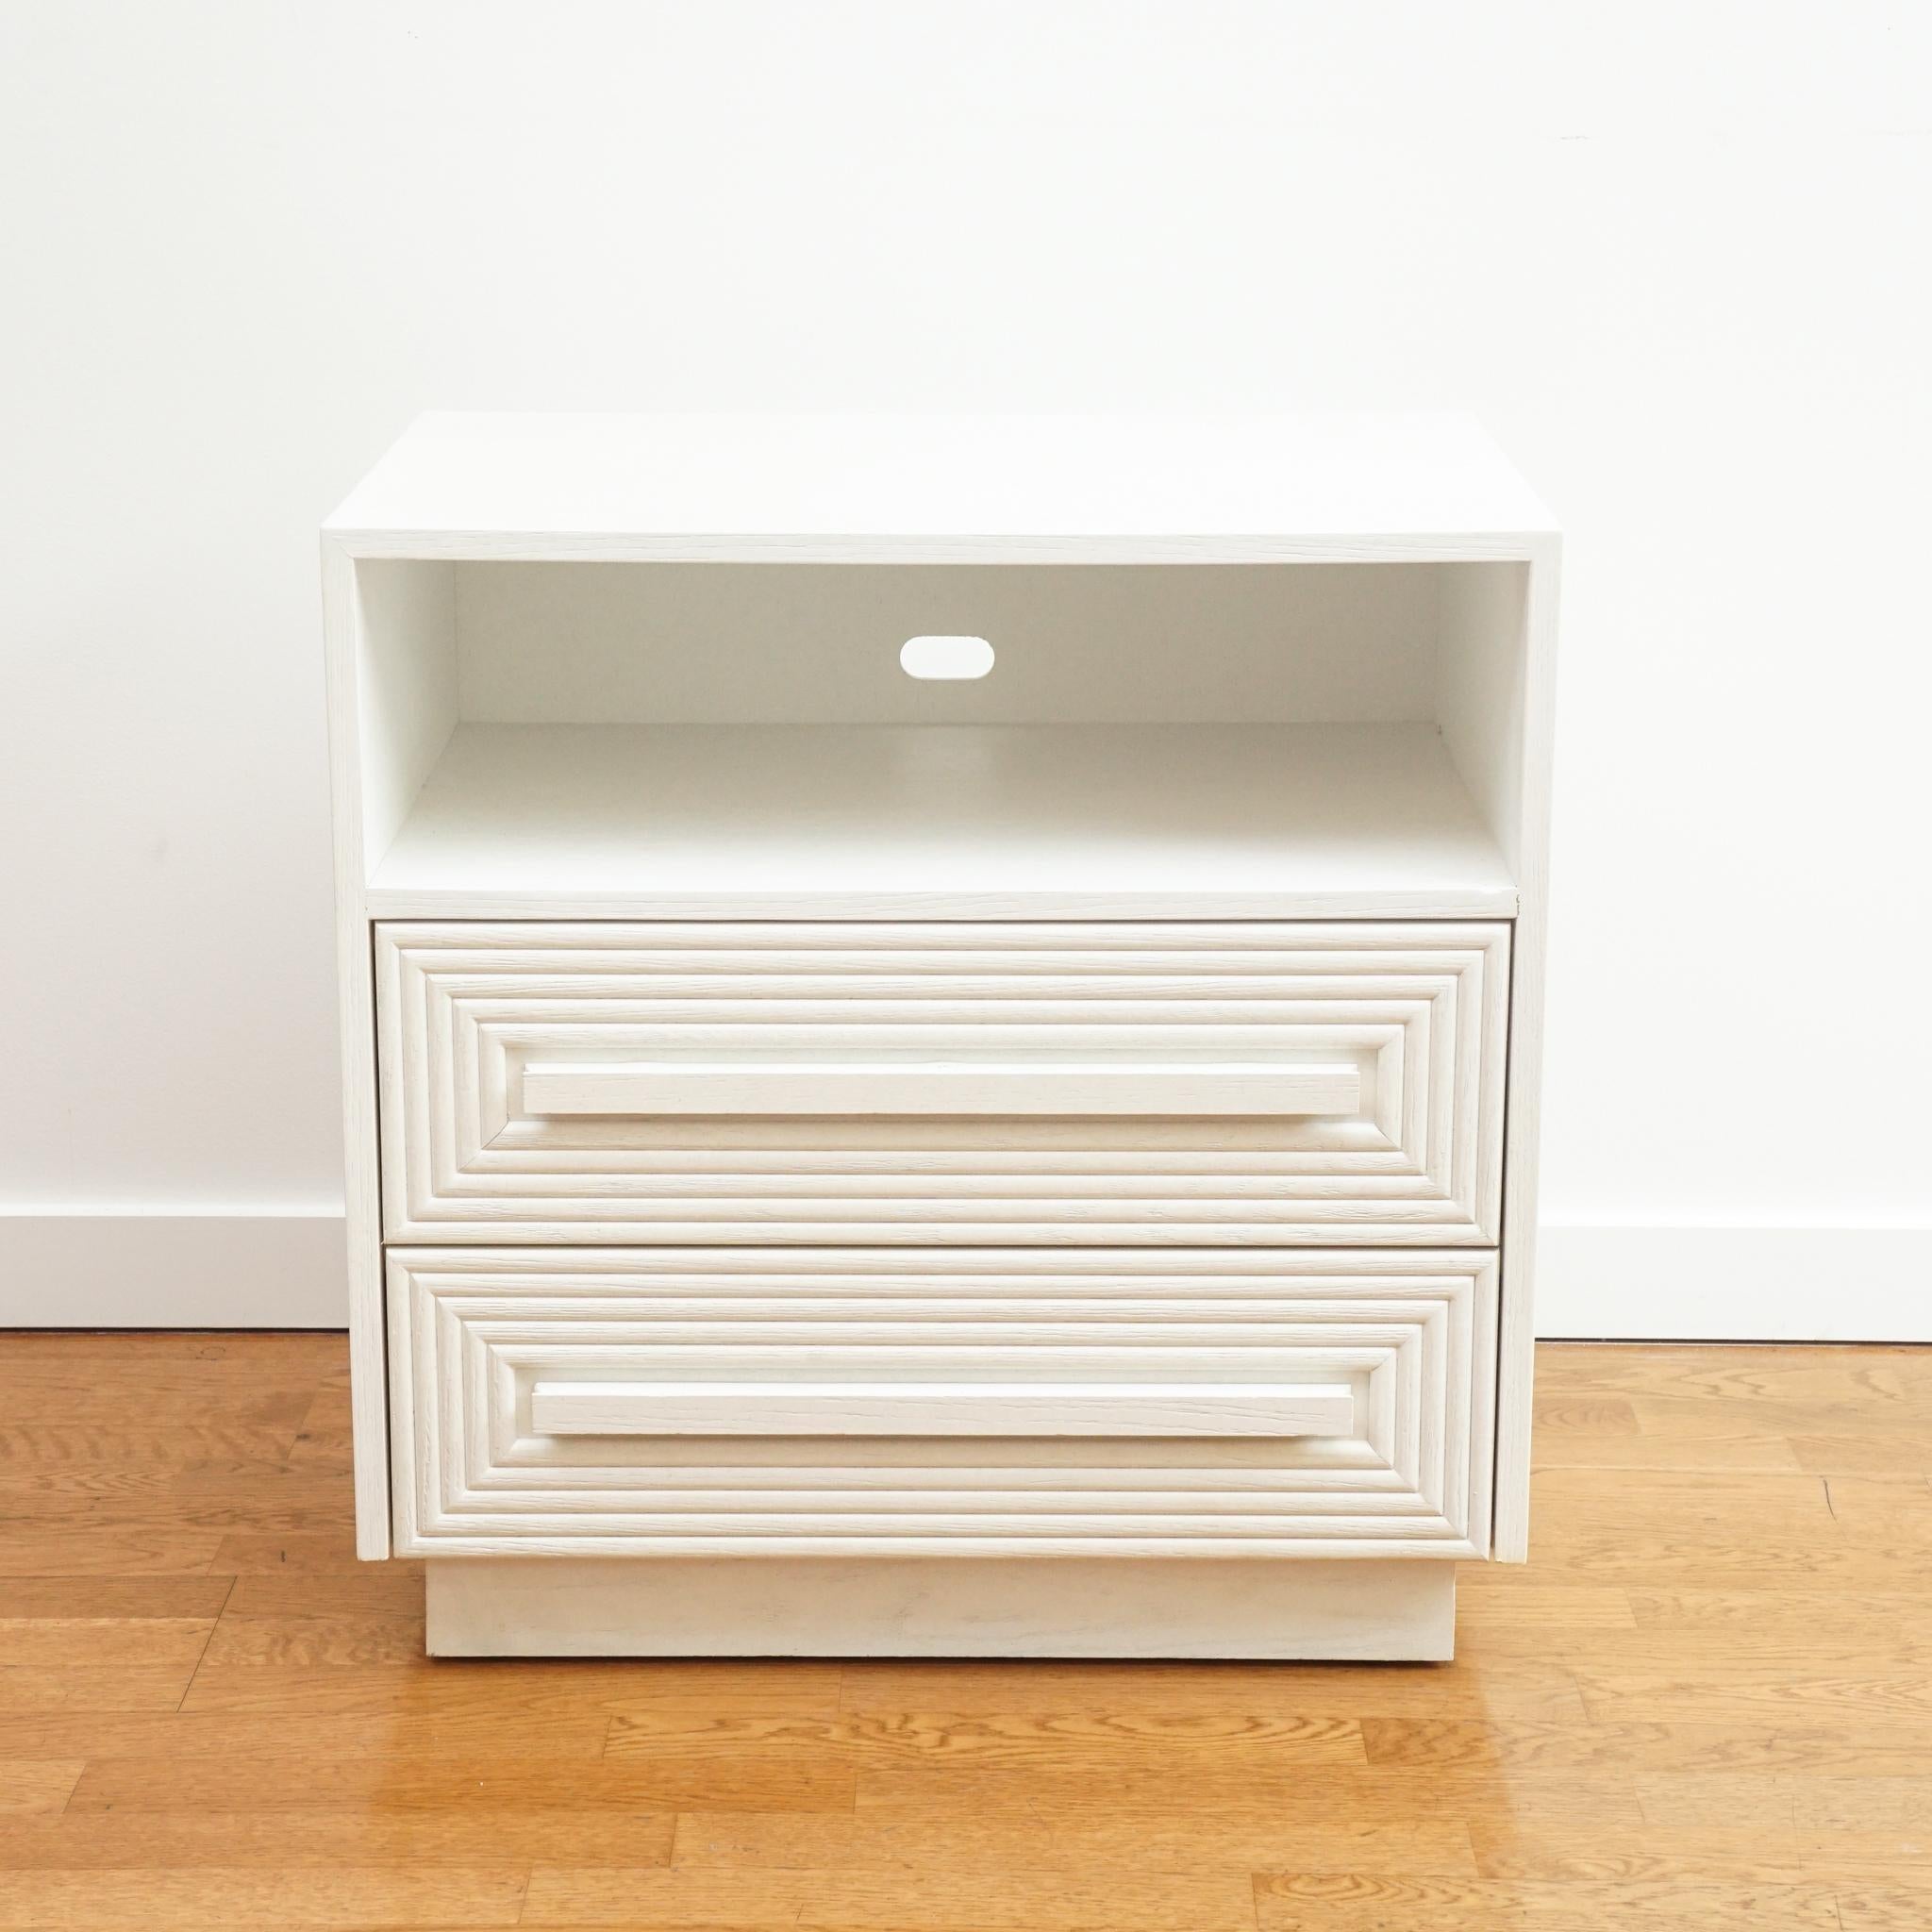 The Morombe white cerused nightstand, shown here, is as notable for its design as its finish. Made of white oak, the drawer fronts feature a rectangular carved design that is accentuated by a long horizontal wood pull.  The white cerused finish is a